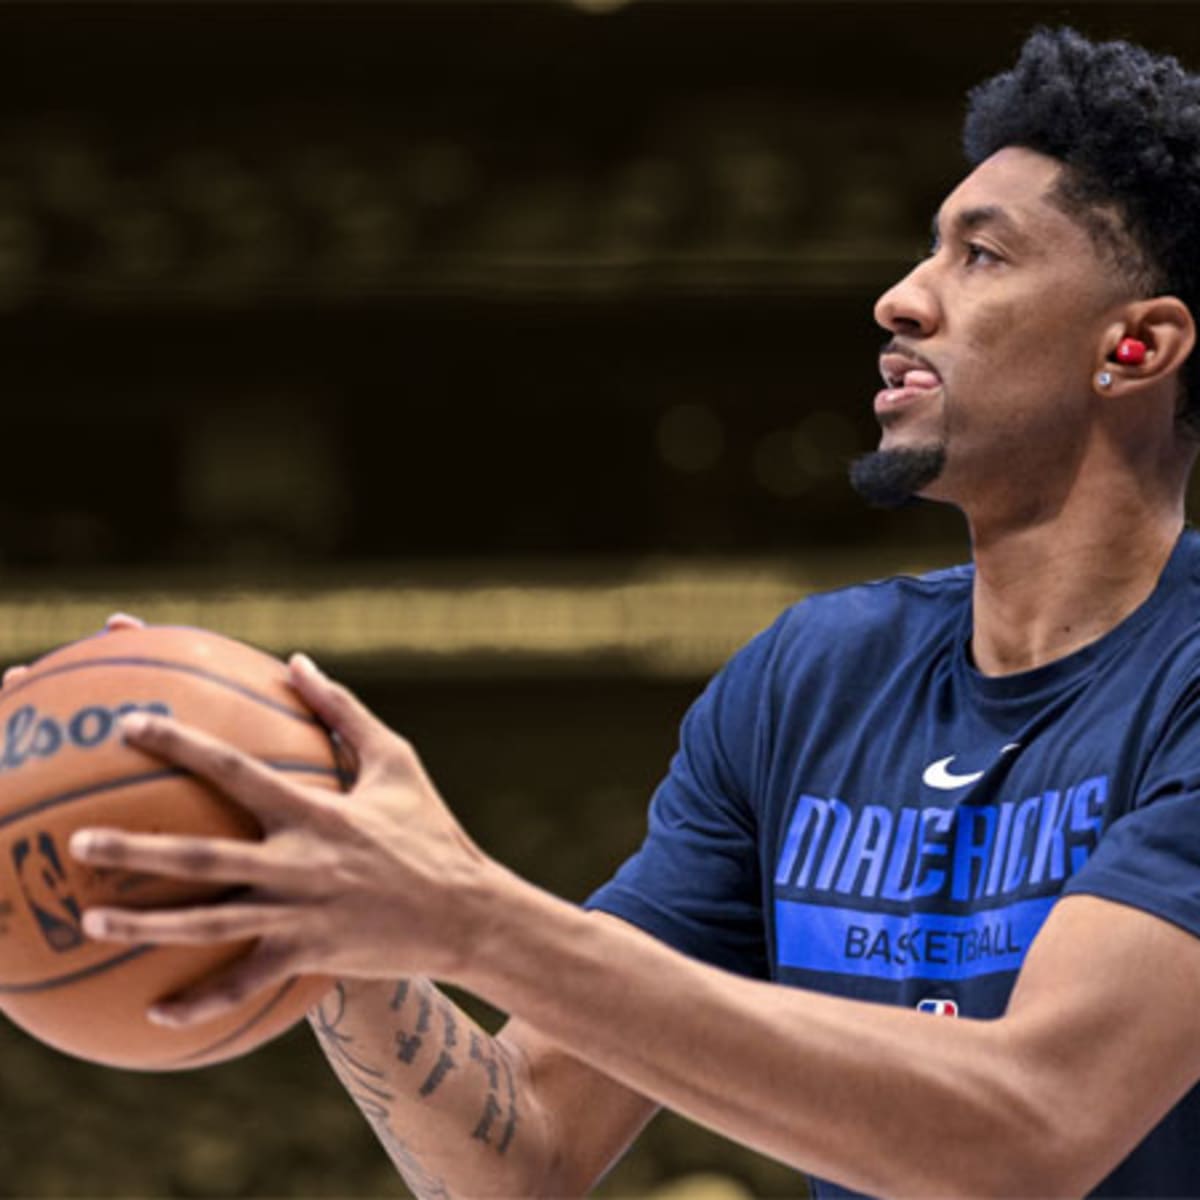 3 reasons why the Mavericks will regret the Christian Wood experiment